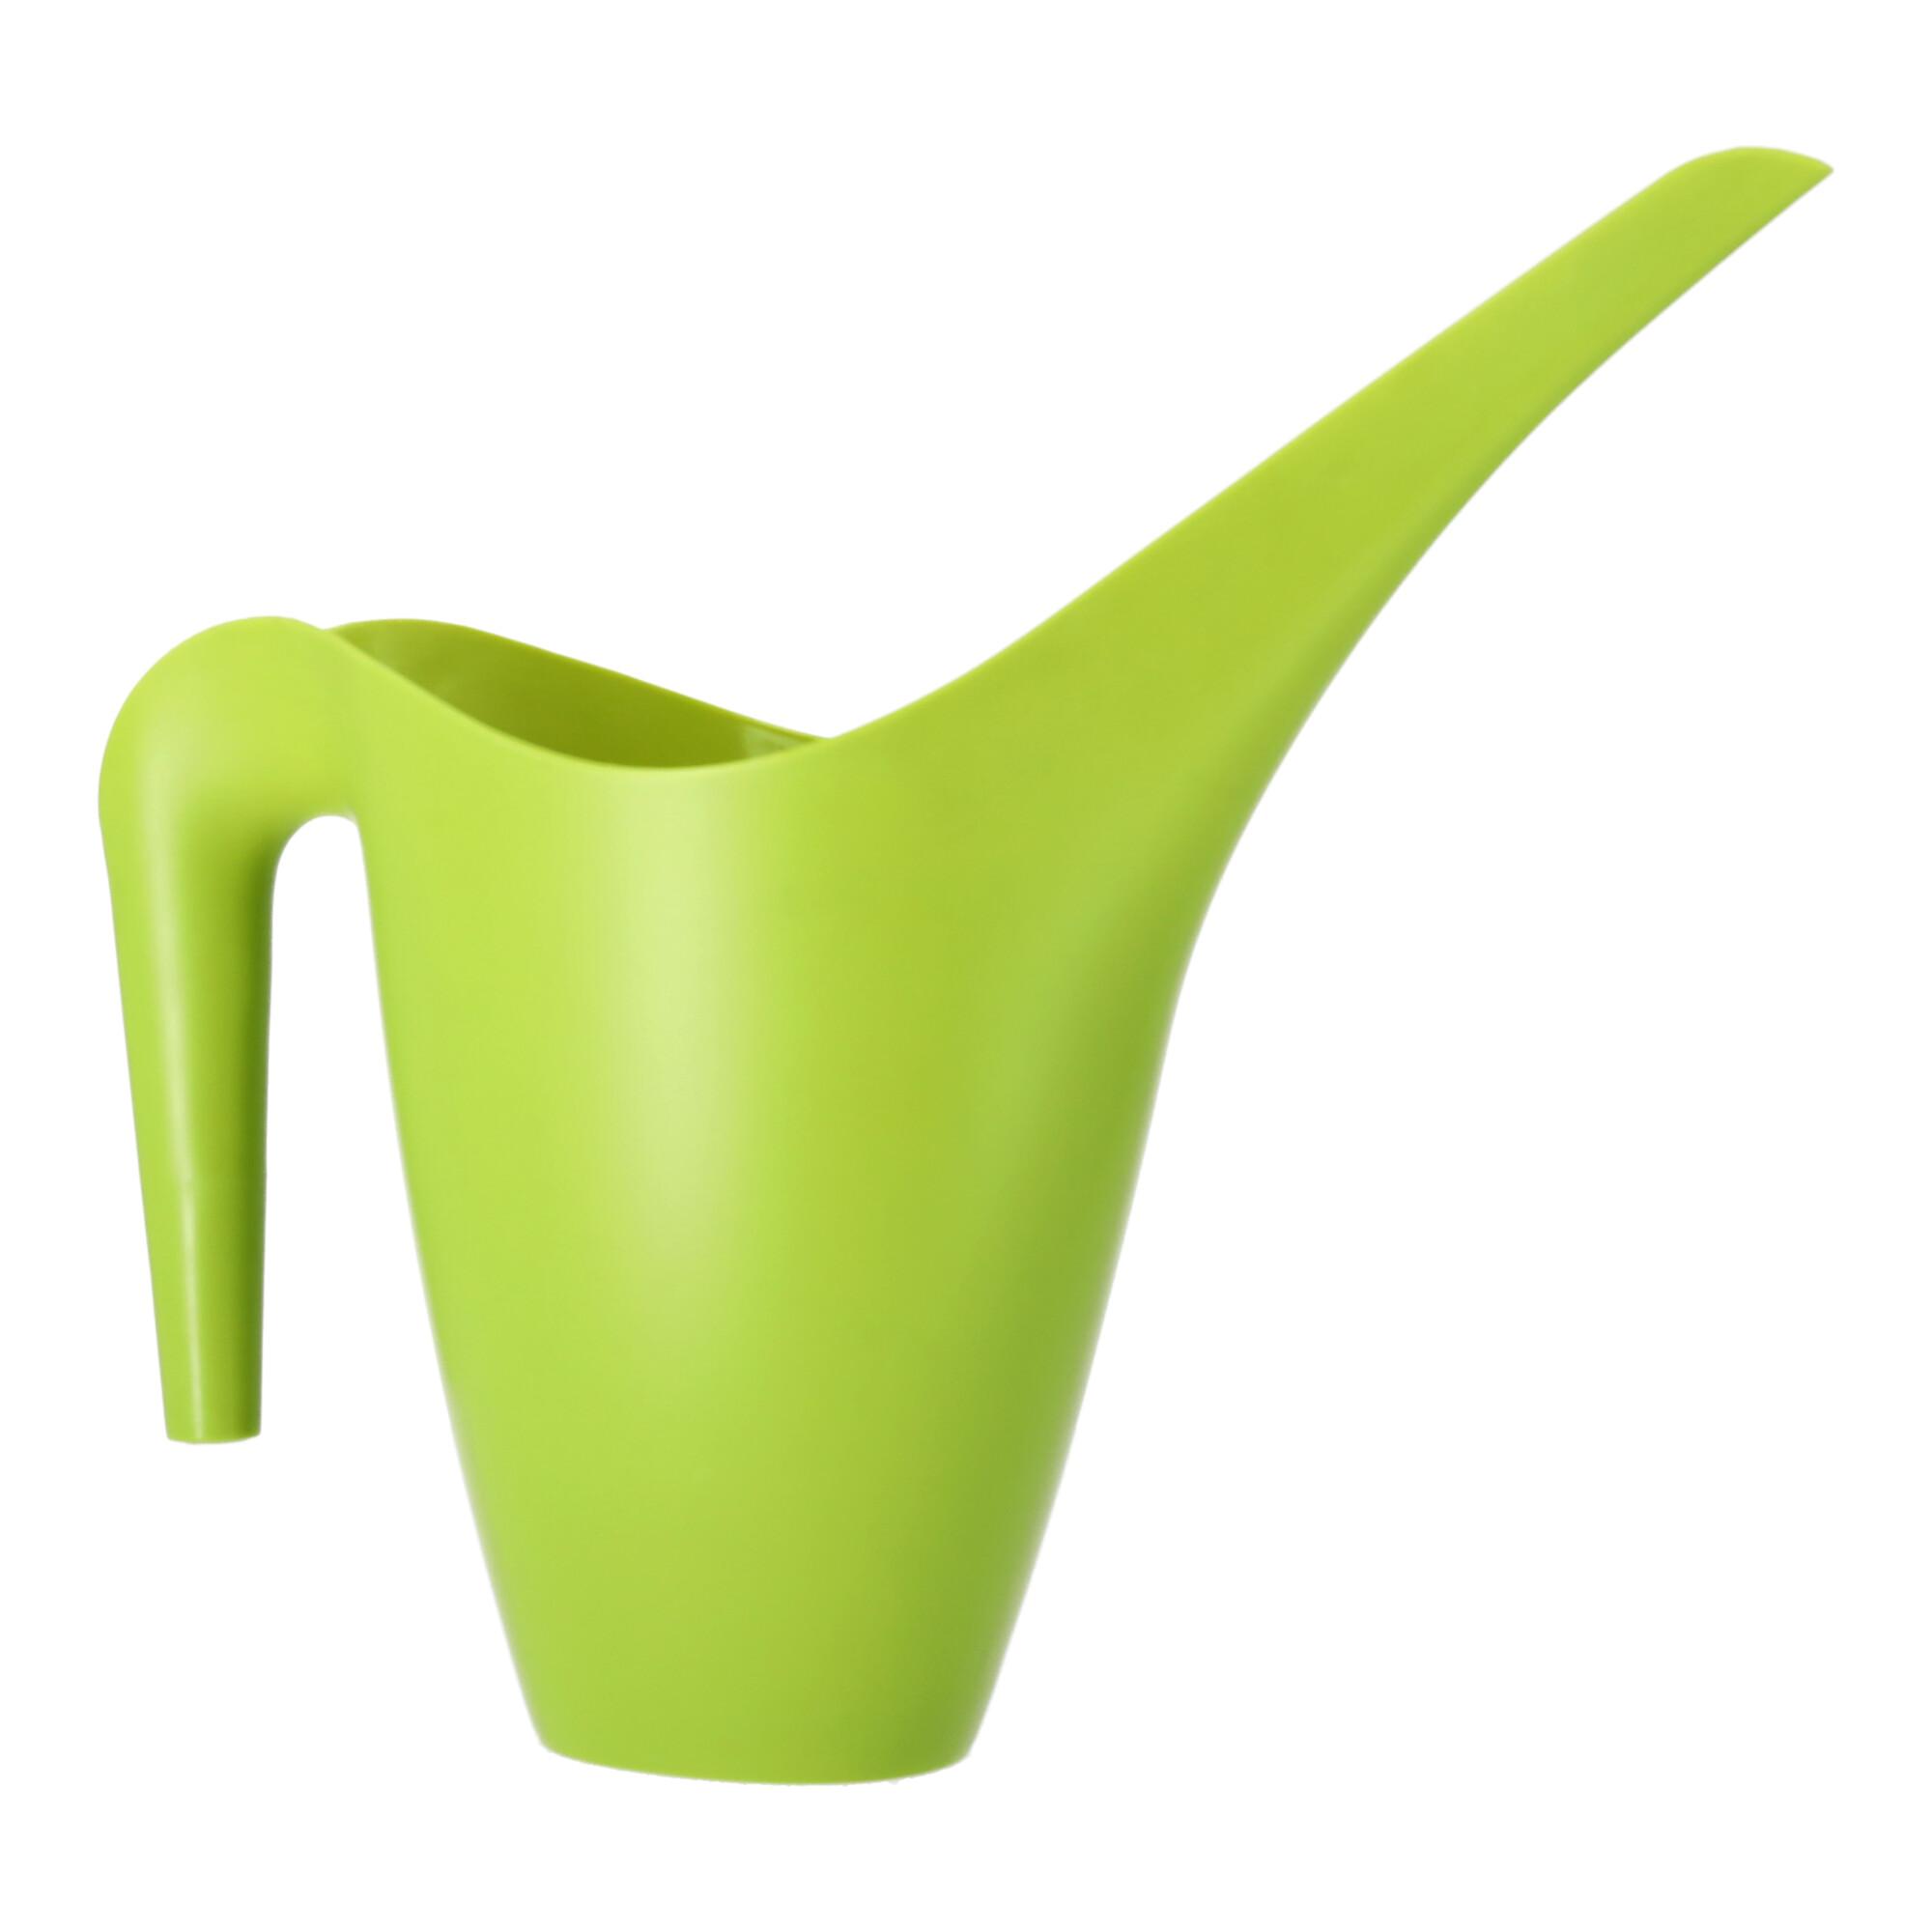 Garden, home watering can 1.5 L - green